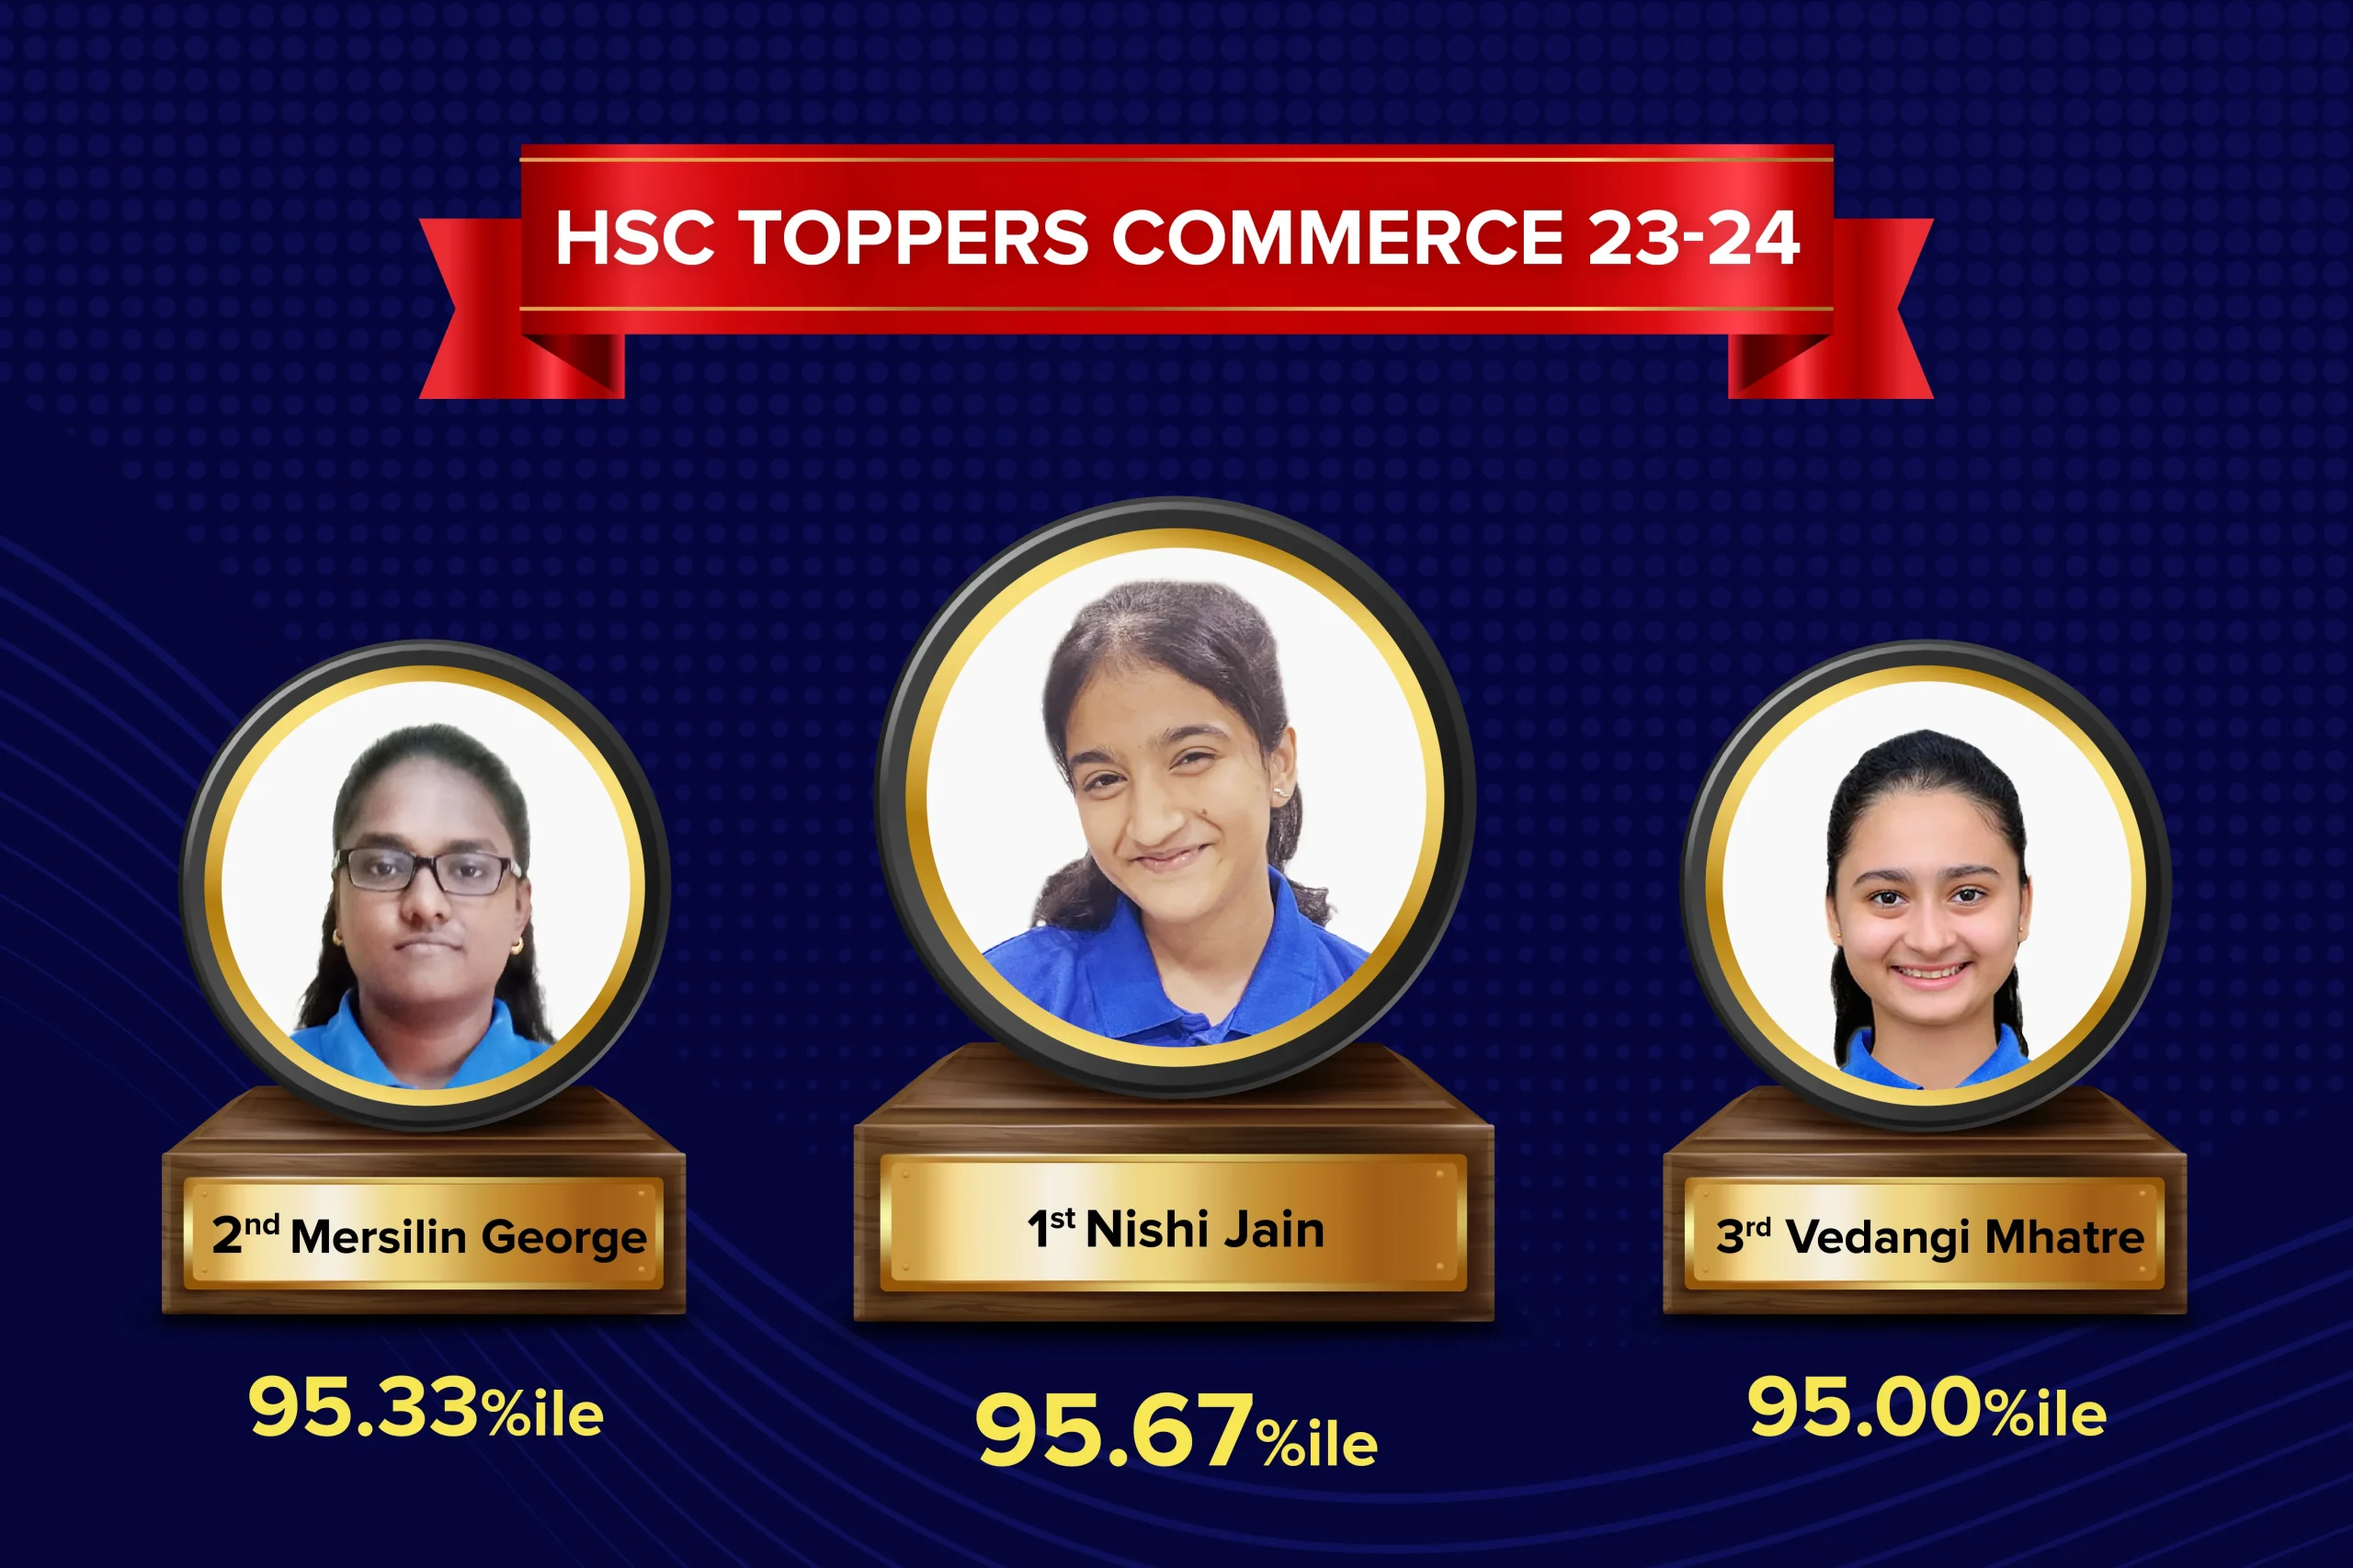 HSC Toppers Commerce 2023-24